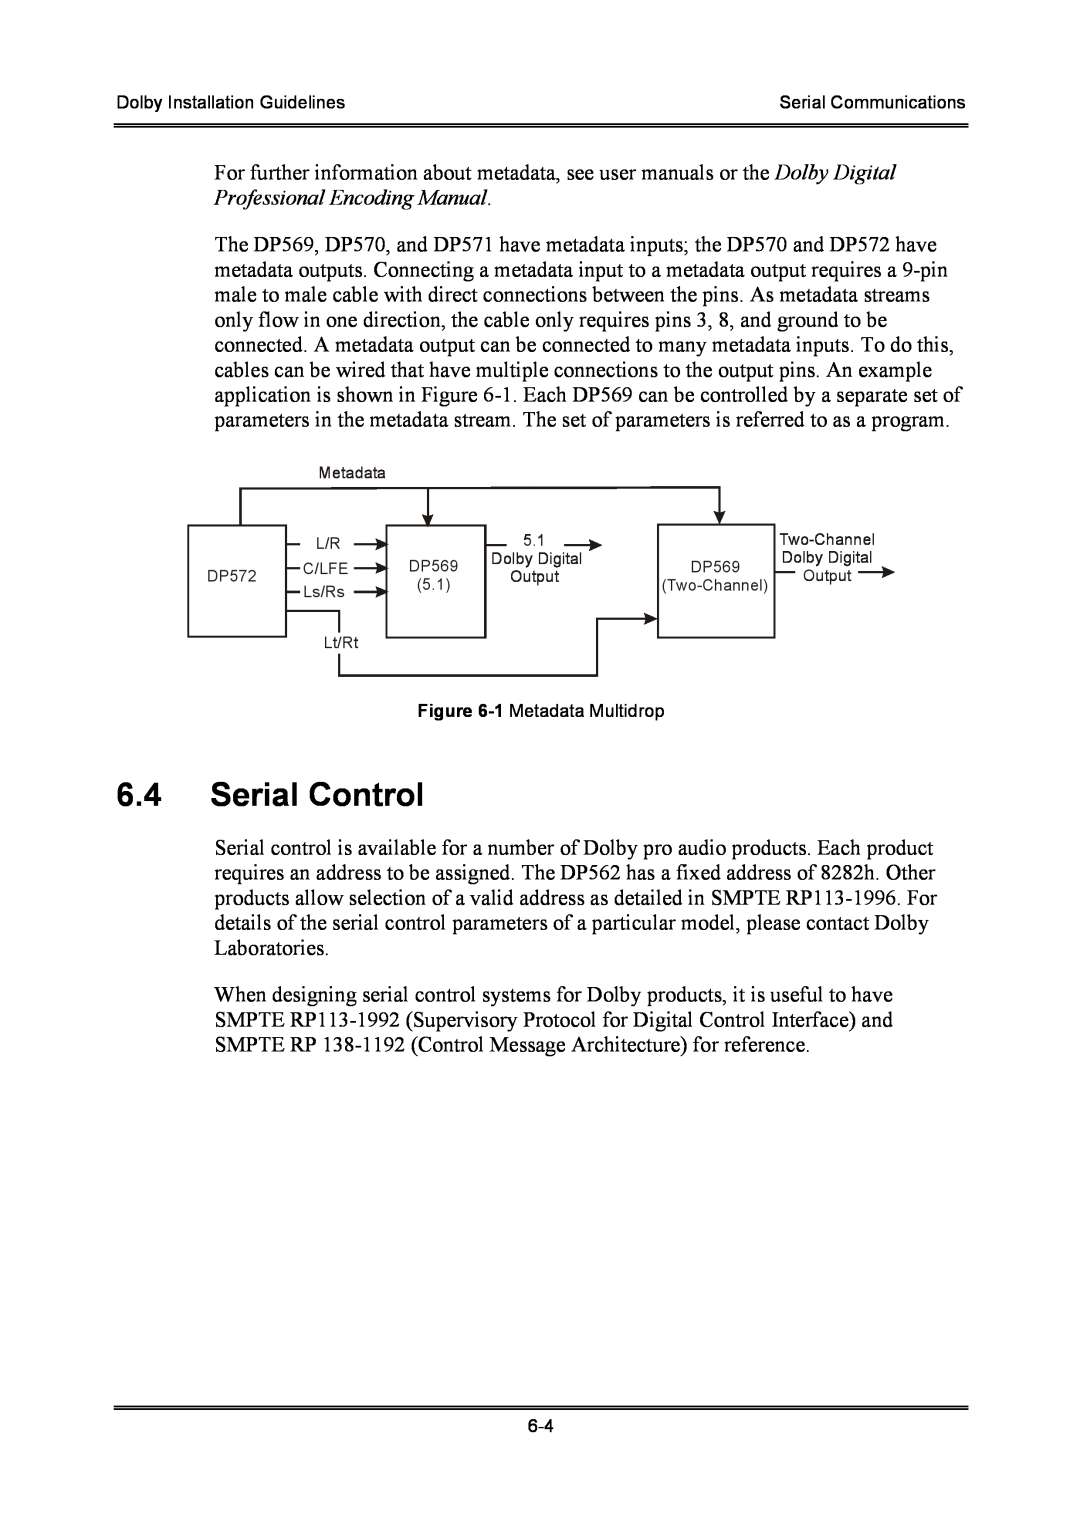 Dolby Laboratories S01/13621 6.4Serial Control, Dolby Installation Guidelines, Serial Communications, 1 Metadata Multidrop 